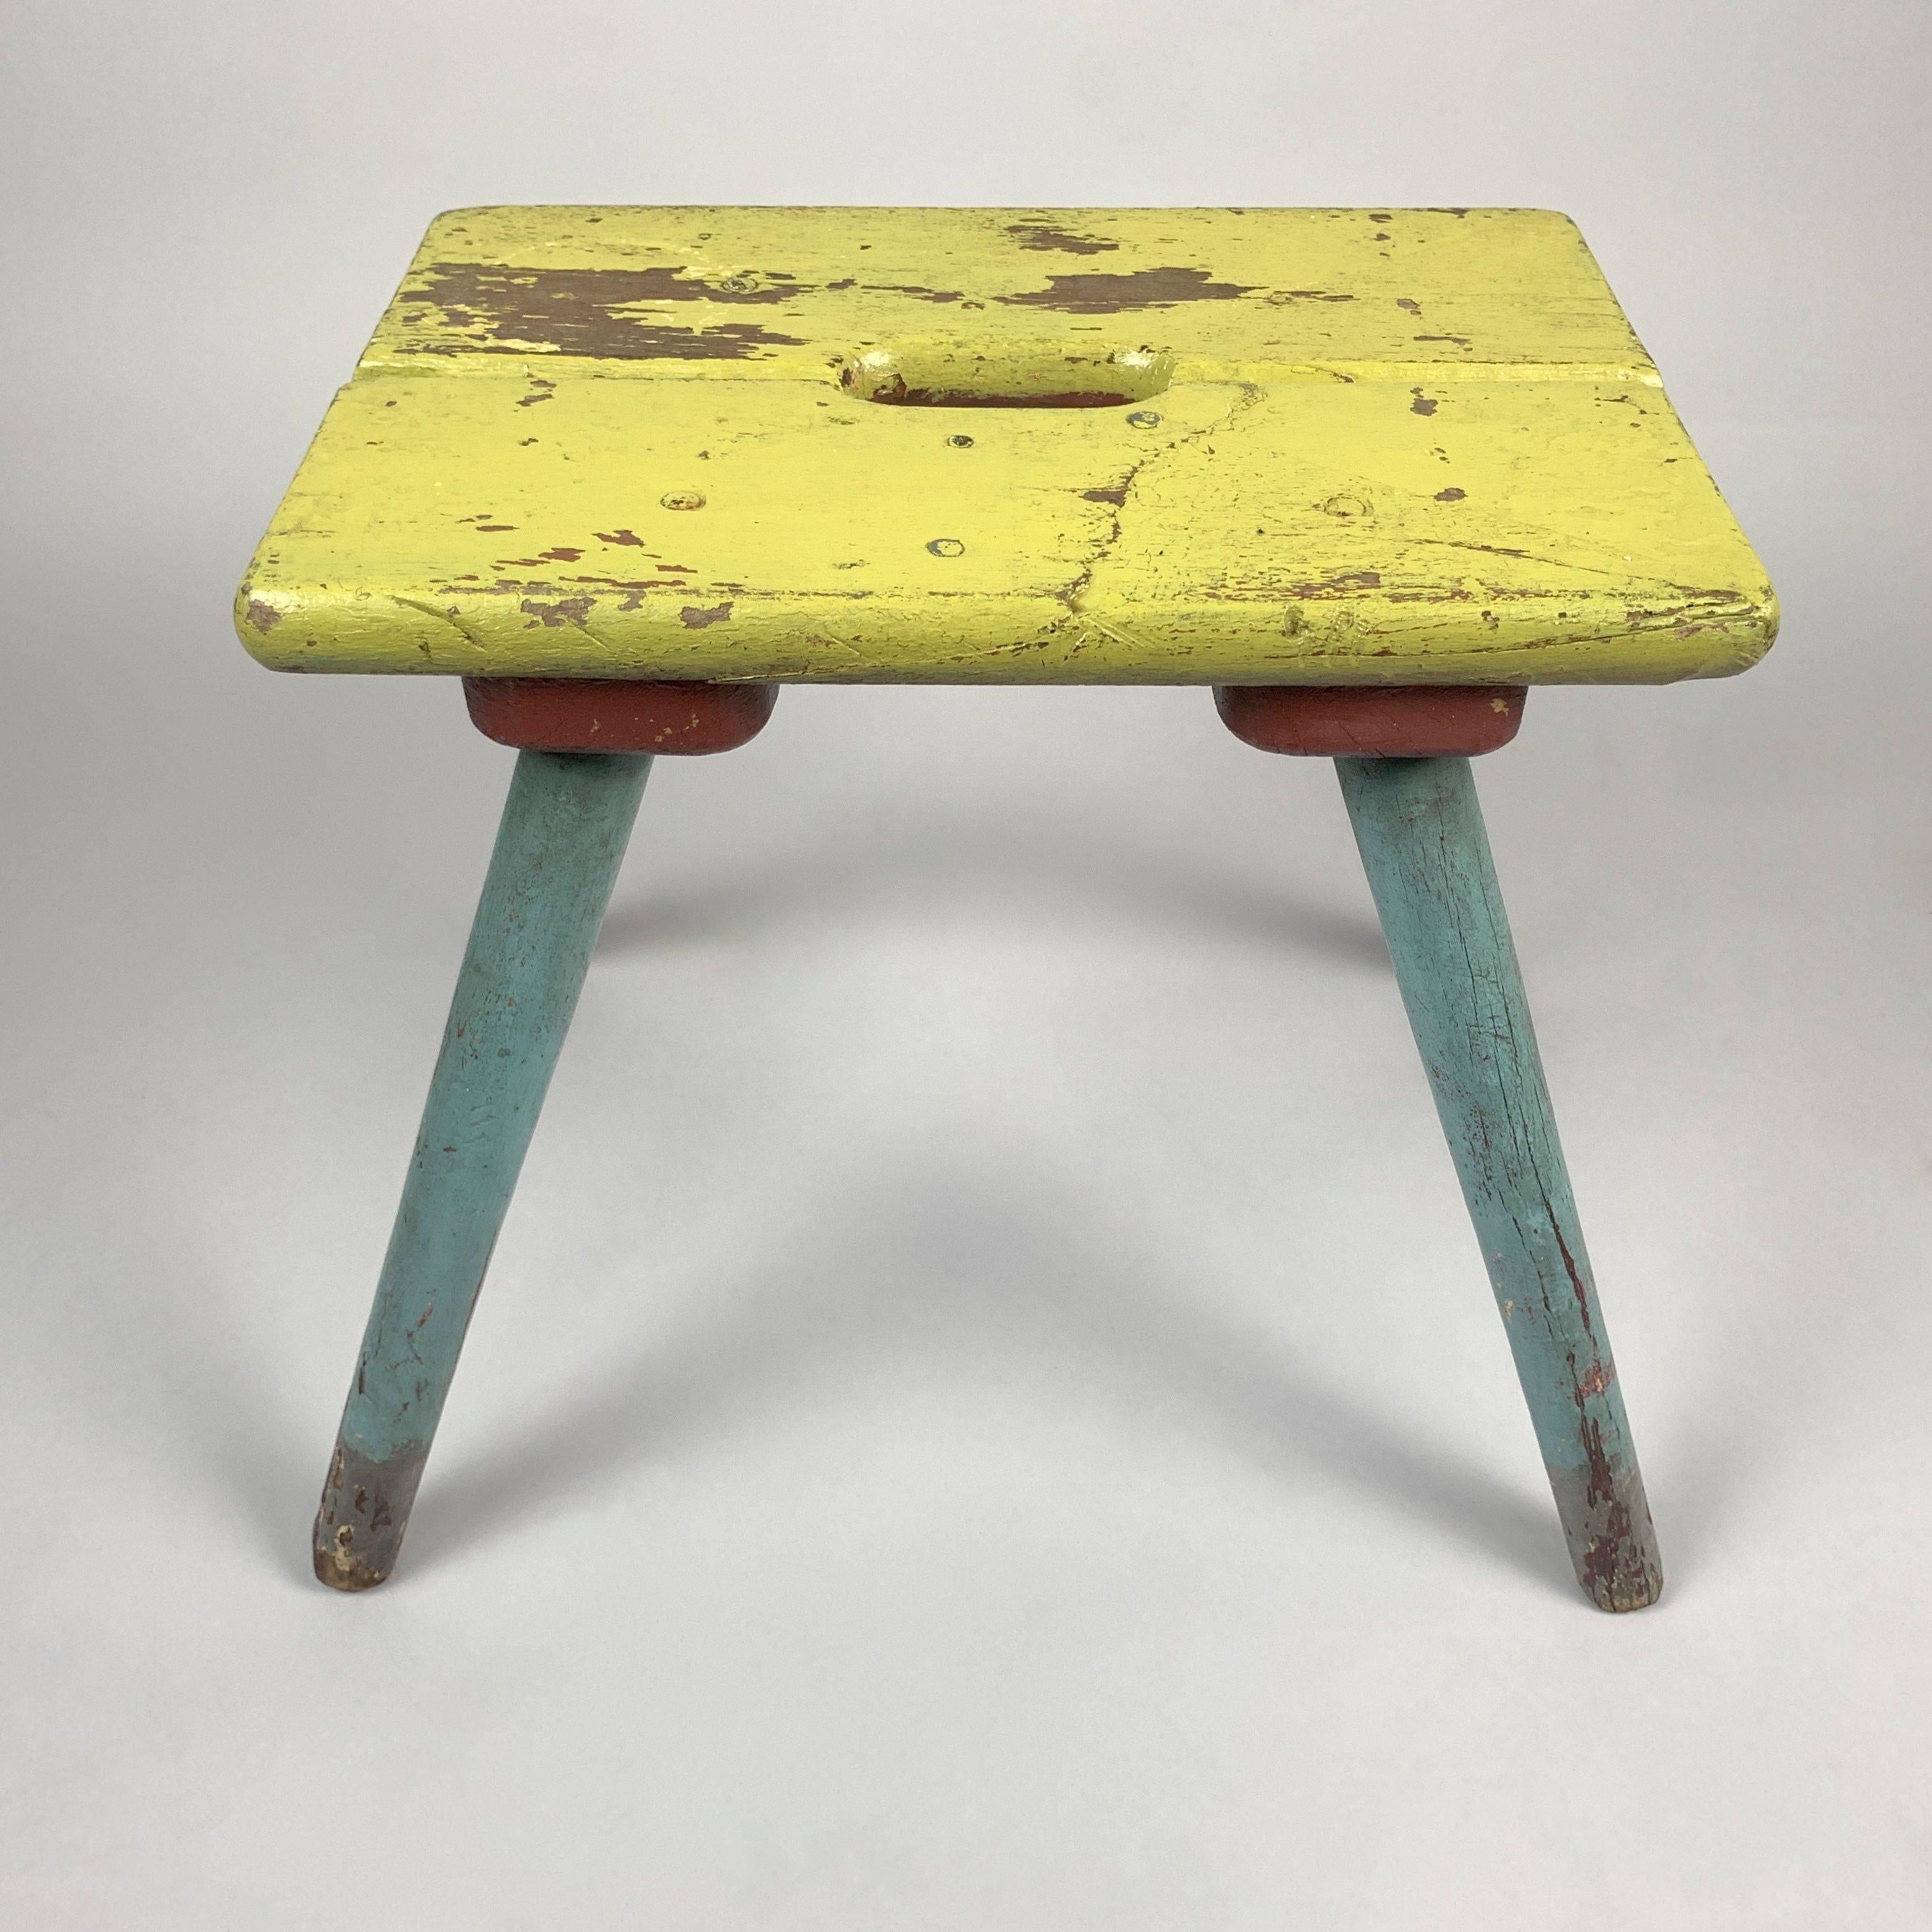 This unique vintage colorful wooden stool with original paint and naturally aged patina has a lot of character. The original chippy paint has been sealed. Even though it's legs look pretty worn out, it's still stable and ready to brighten up your